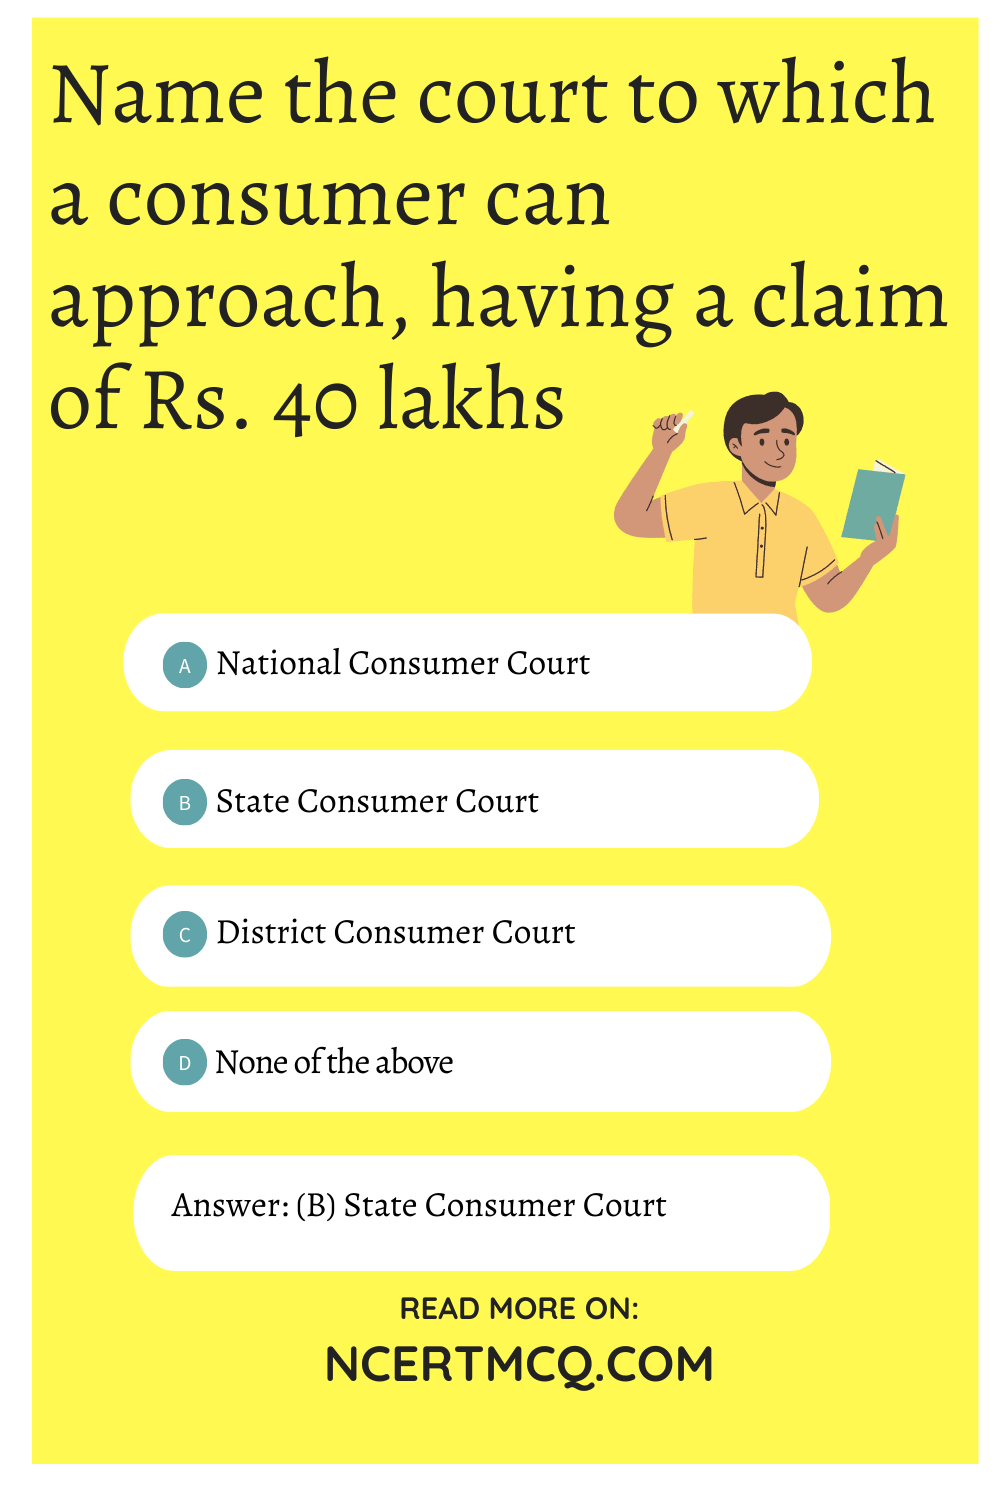 Name the court to which a consumer can approach, having a claim of Rs. 40 lakhs